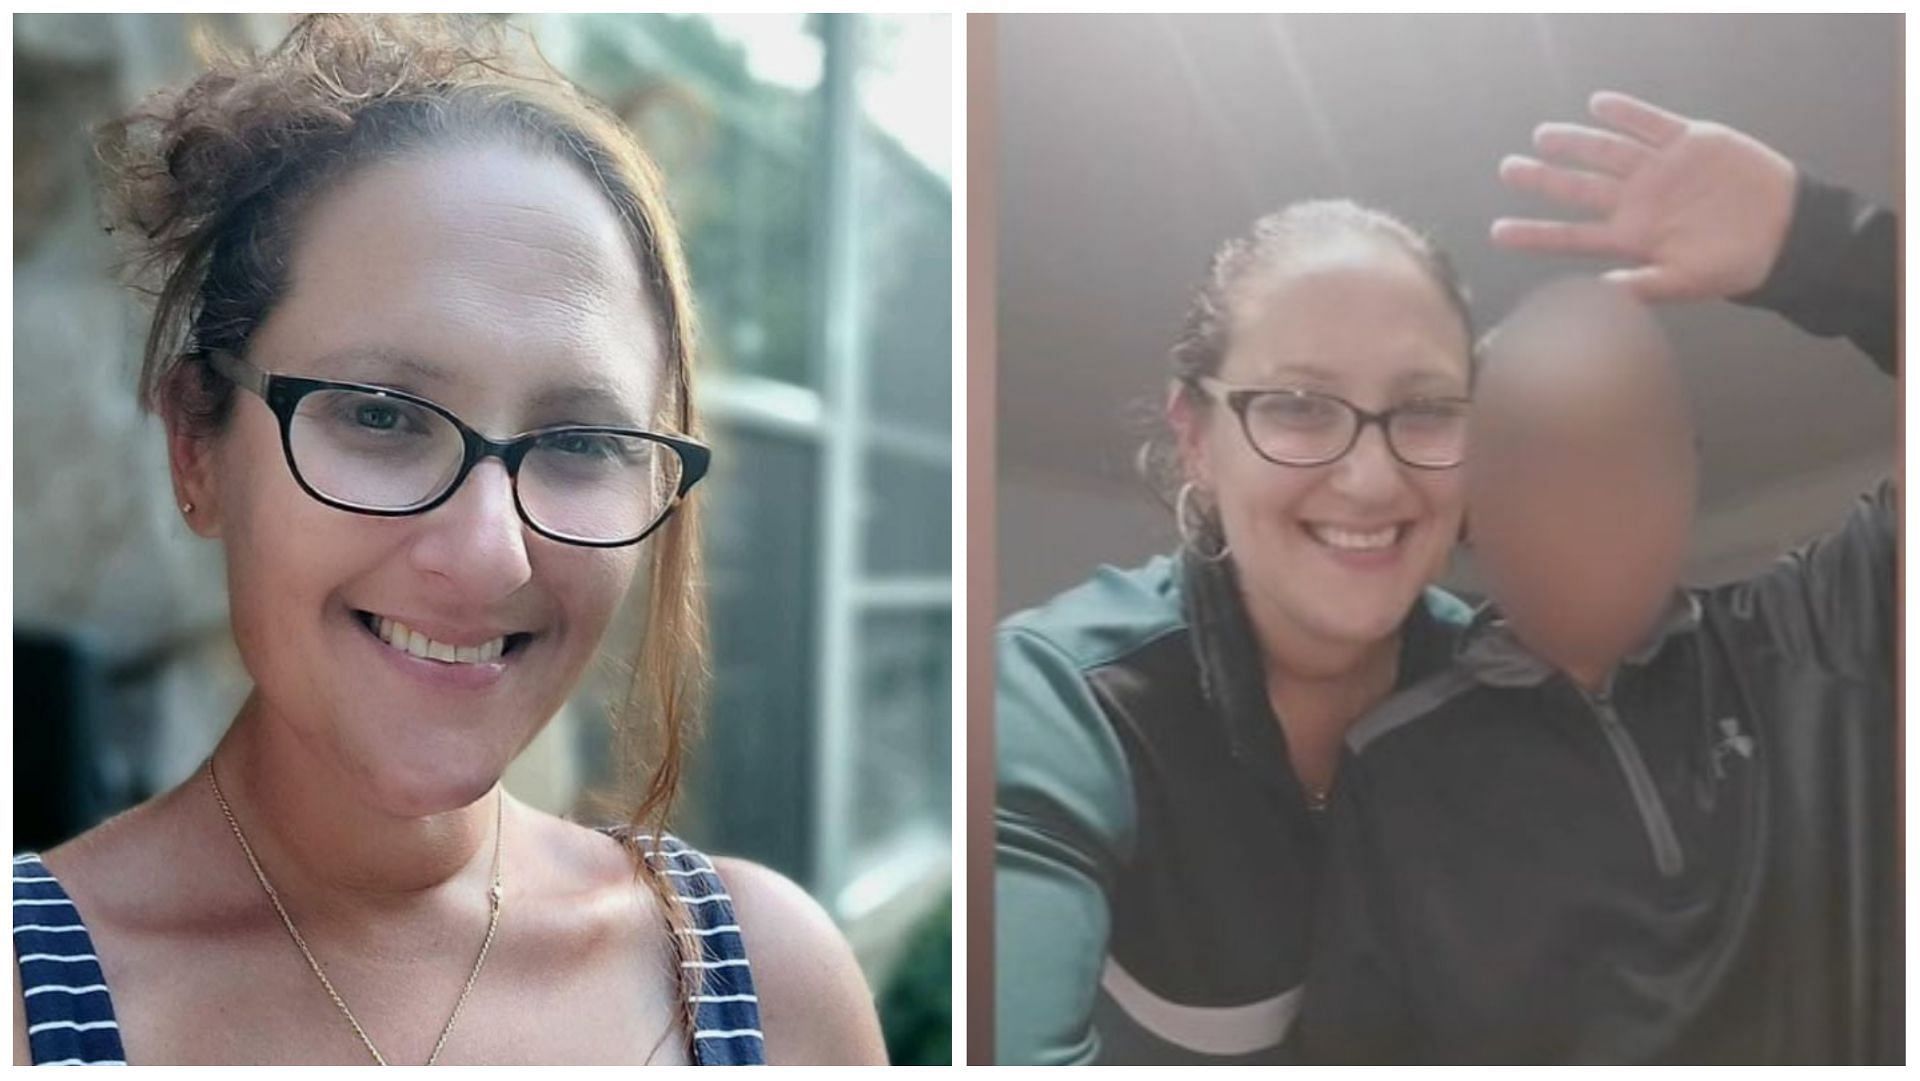 A two-week search came to an end after the body of missing Jennifer Brown was found in a shallow grave, (Images via @901Lulu and @ABaskerville10/Twitter)